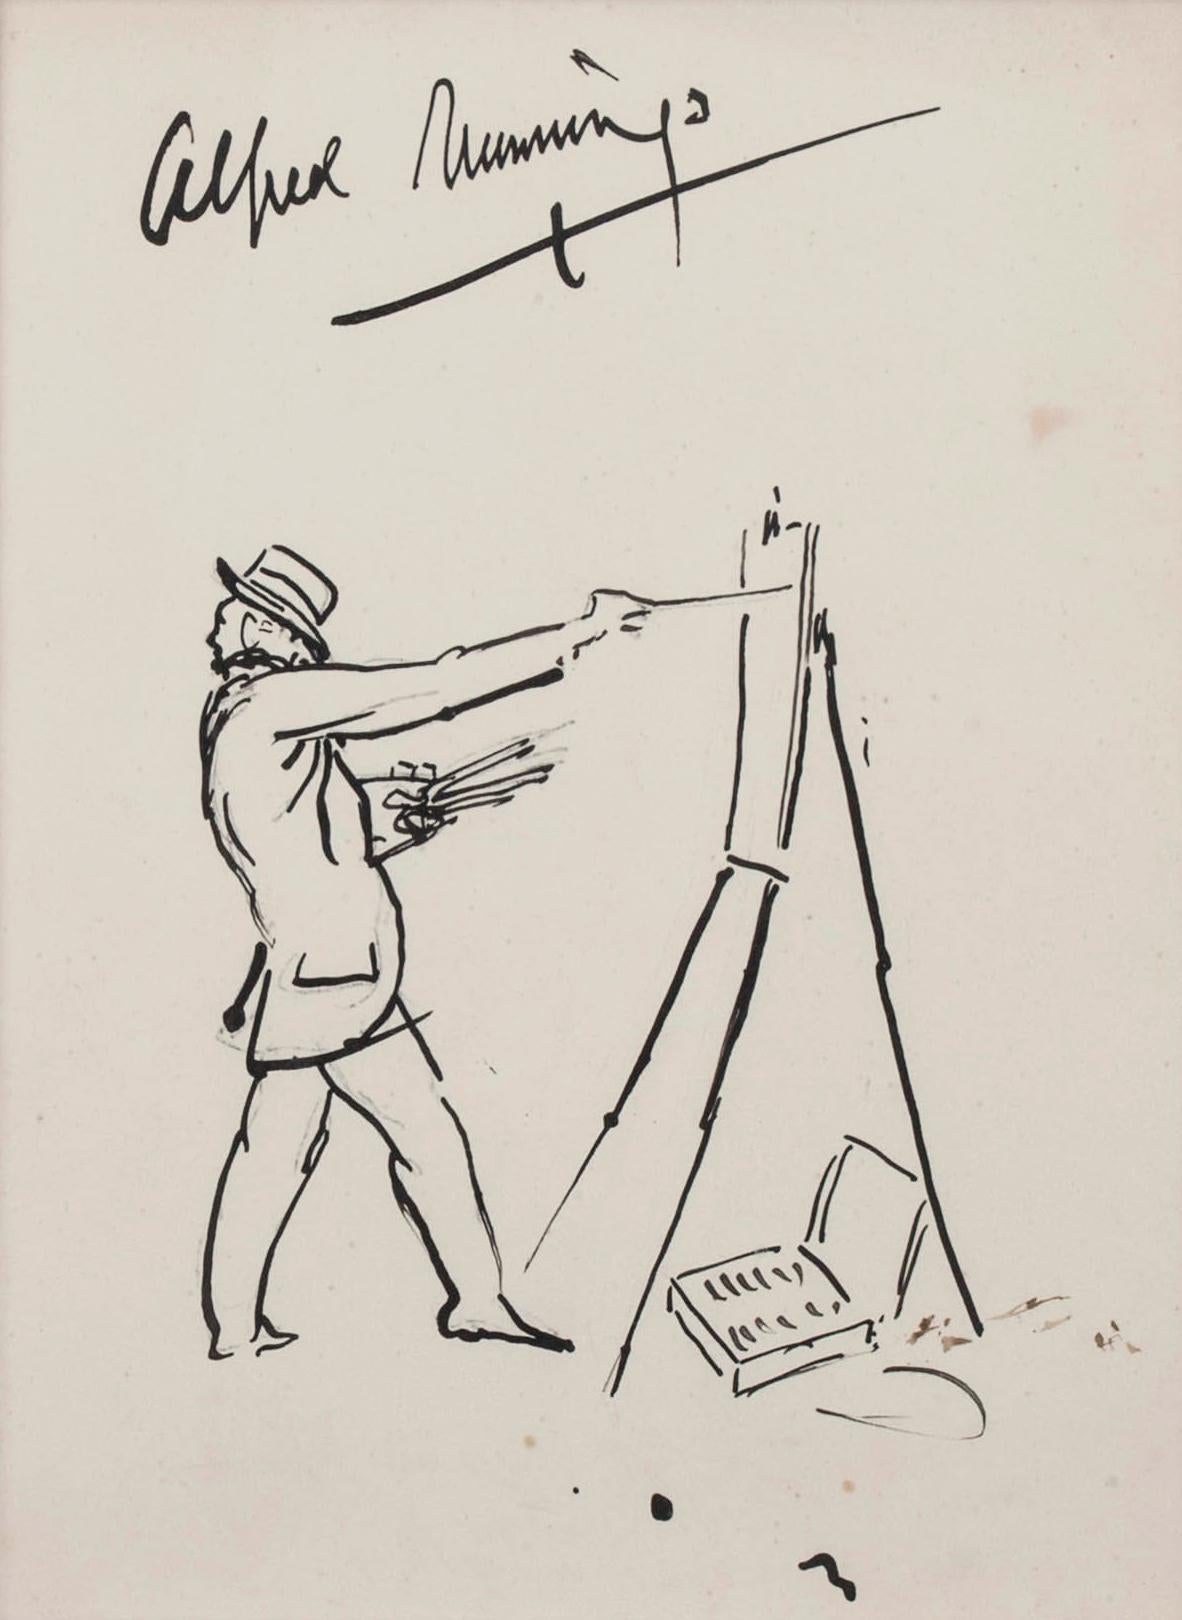 SIR ALFRED MUNNINGS
British, 1878 – 1959

Self-Portrait of the Artist at an Easel

Signed Alfred Munnings
Pen and ink on paper
11½ x 9 inches (29.2 x 22.8 cm)
Sight size: 9 x 7 inches (22.8 x 17.8 cm)
Framed: 17½ x 15¼ inches (44.5 x 38.7